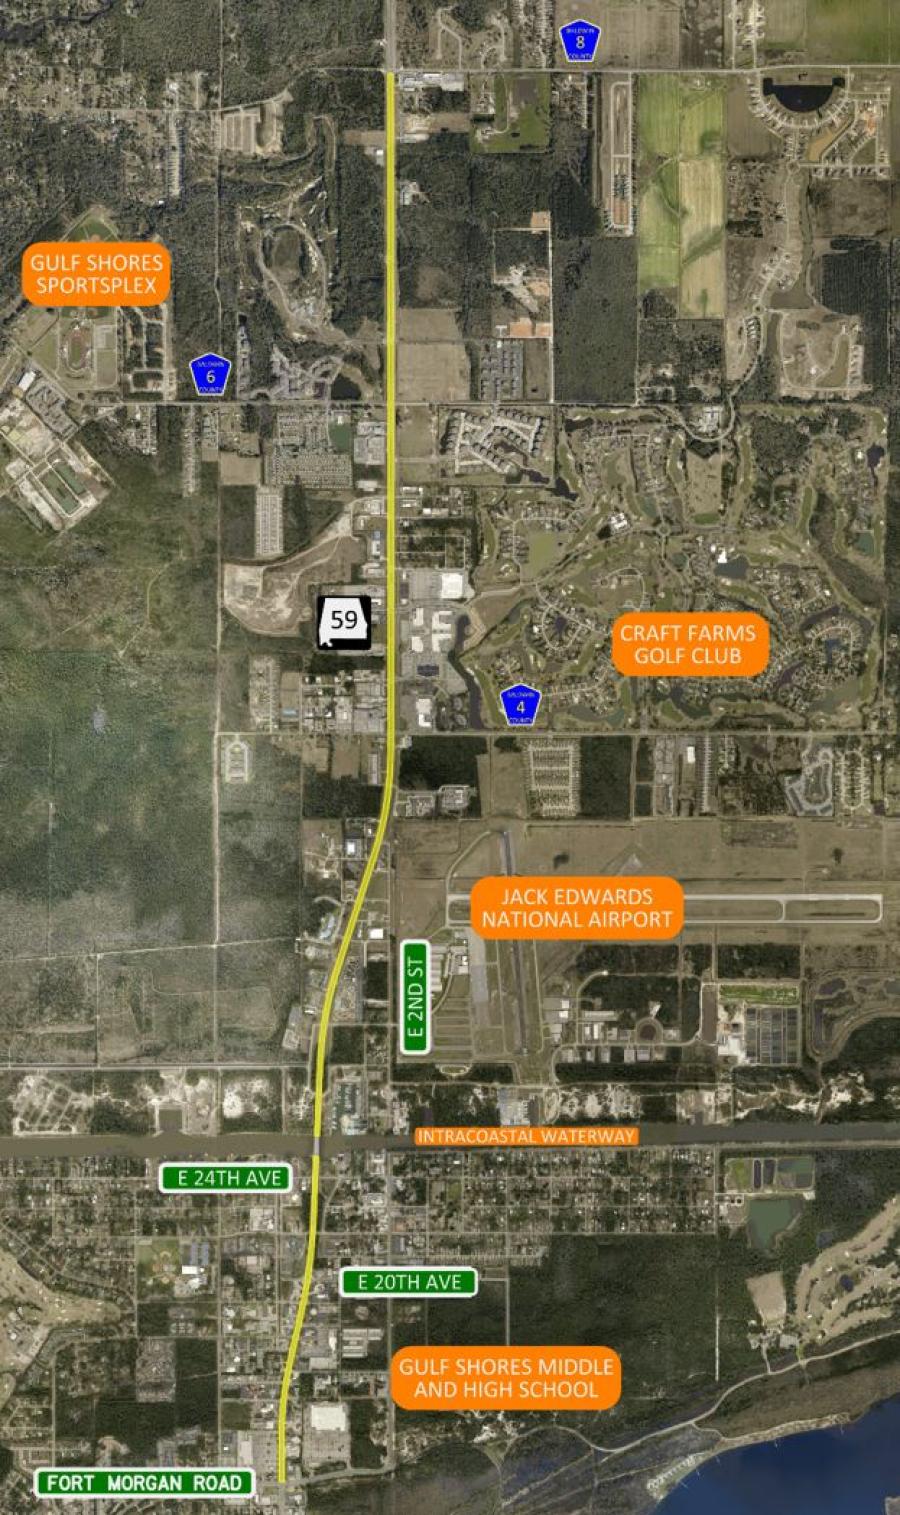 New Third Southbound Lane from Coastal Gateway Boulevard  to Fort Morgan Road (Hwy 180). (Map courtesy of City of Gulf Shores Alabama website)